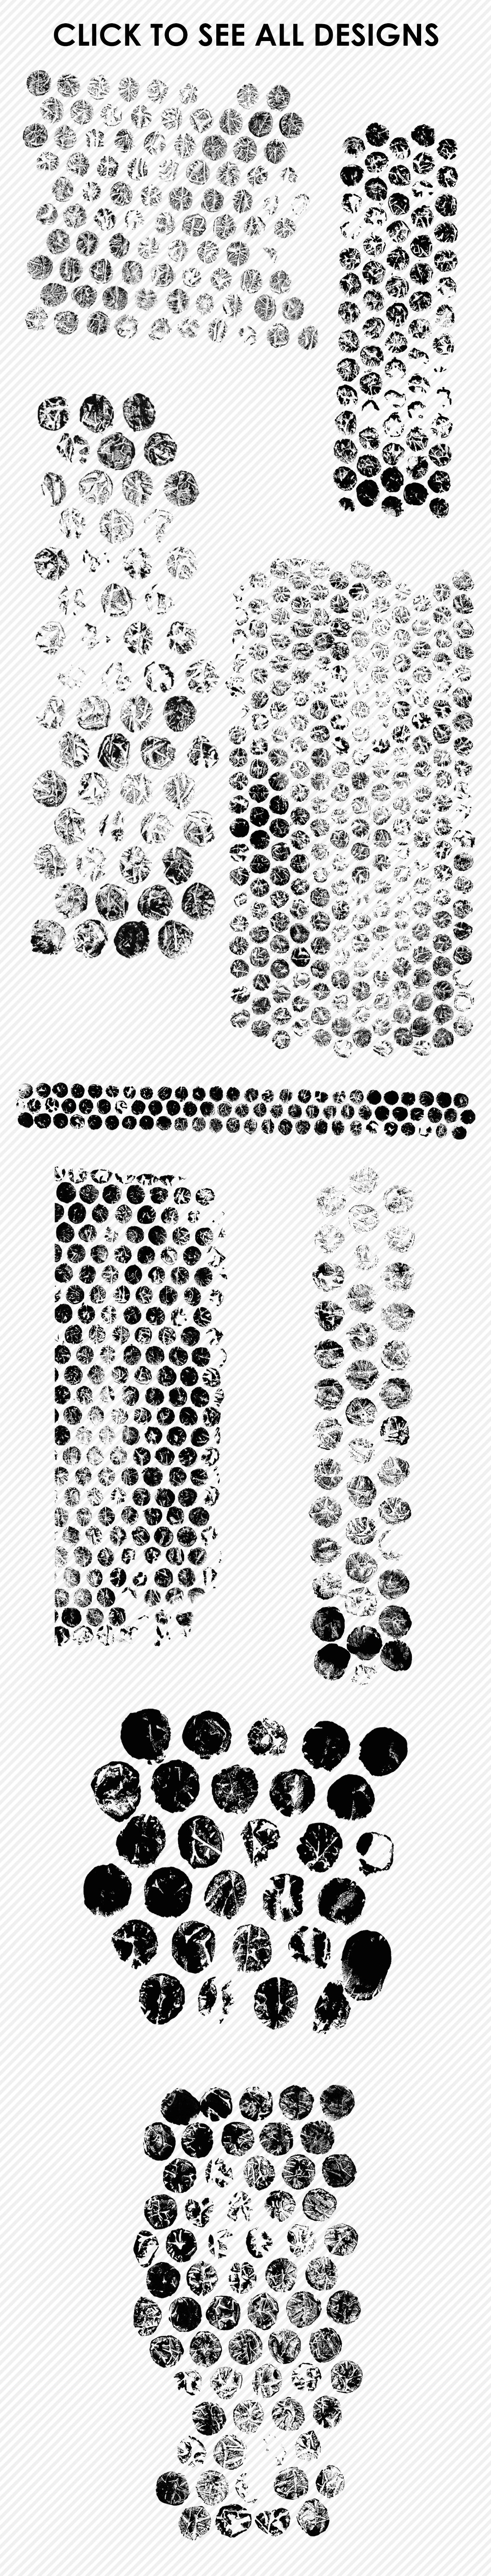 Bubble Wrap PS Brushes & Stampspreview image.